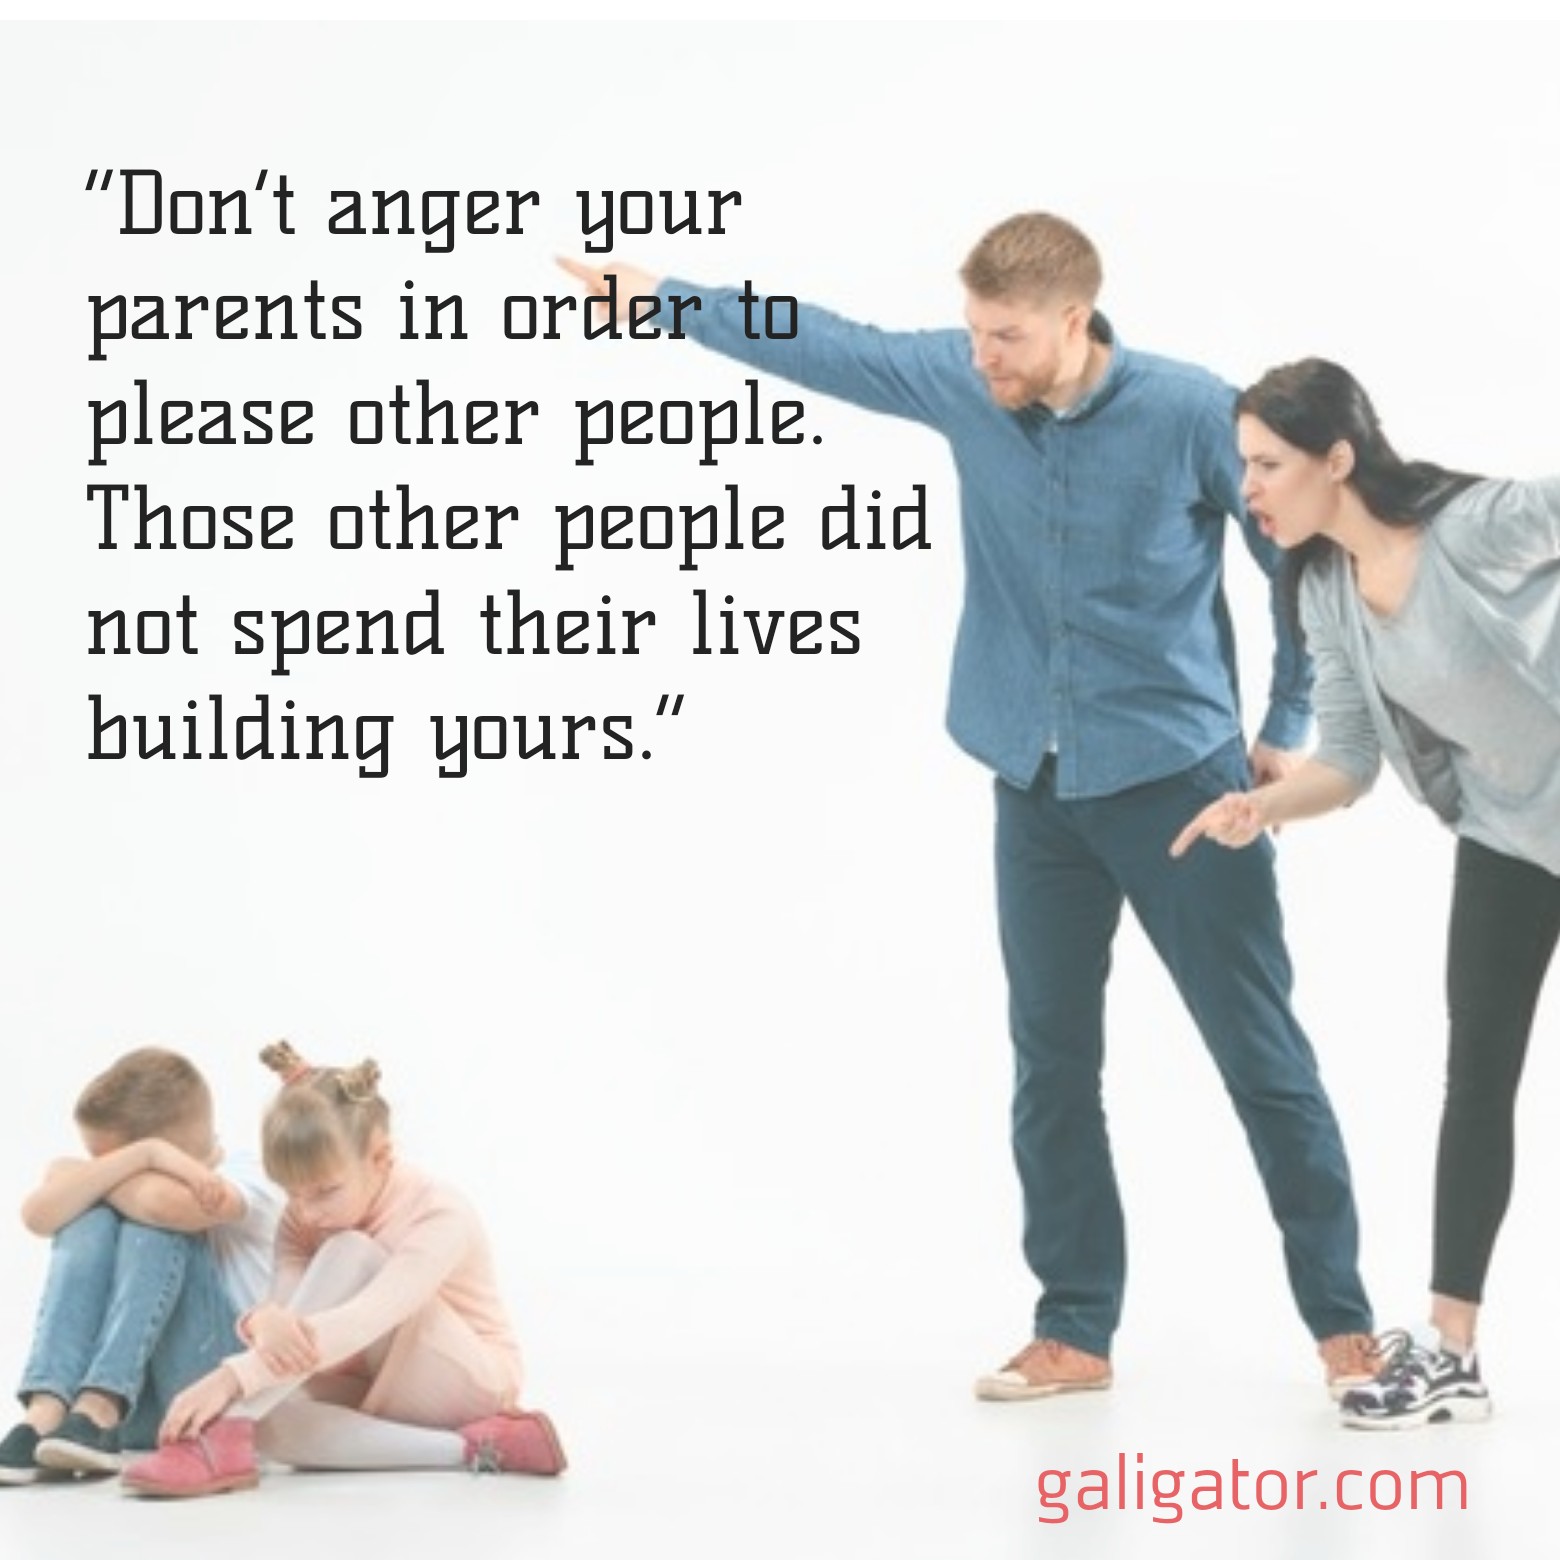 selfish parents quotes, abandonment selfish parents quotes, unhealthy relationship selfish parents quotes, selfish parental alienation quotes, quotes about parents being selfish